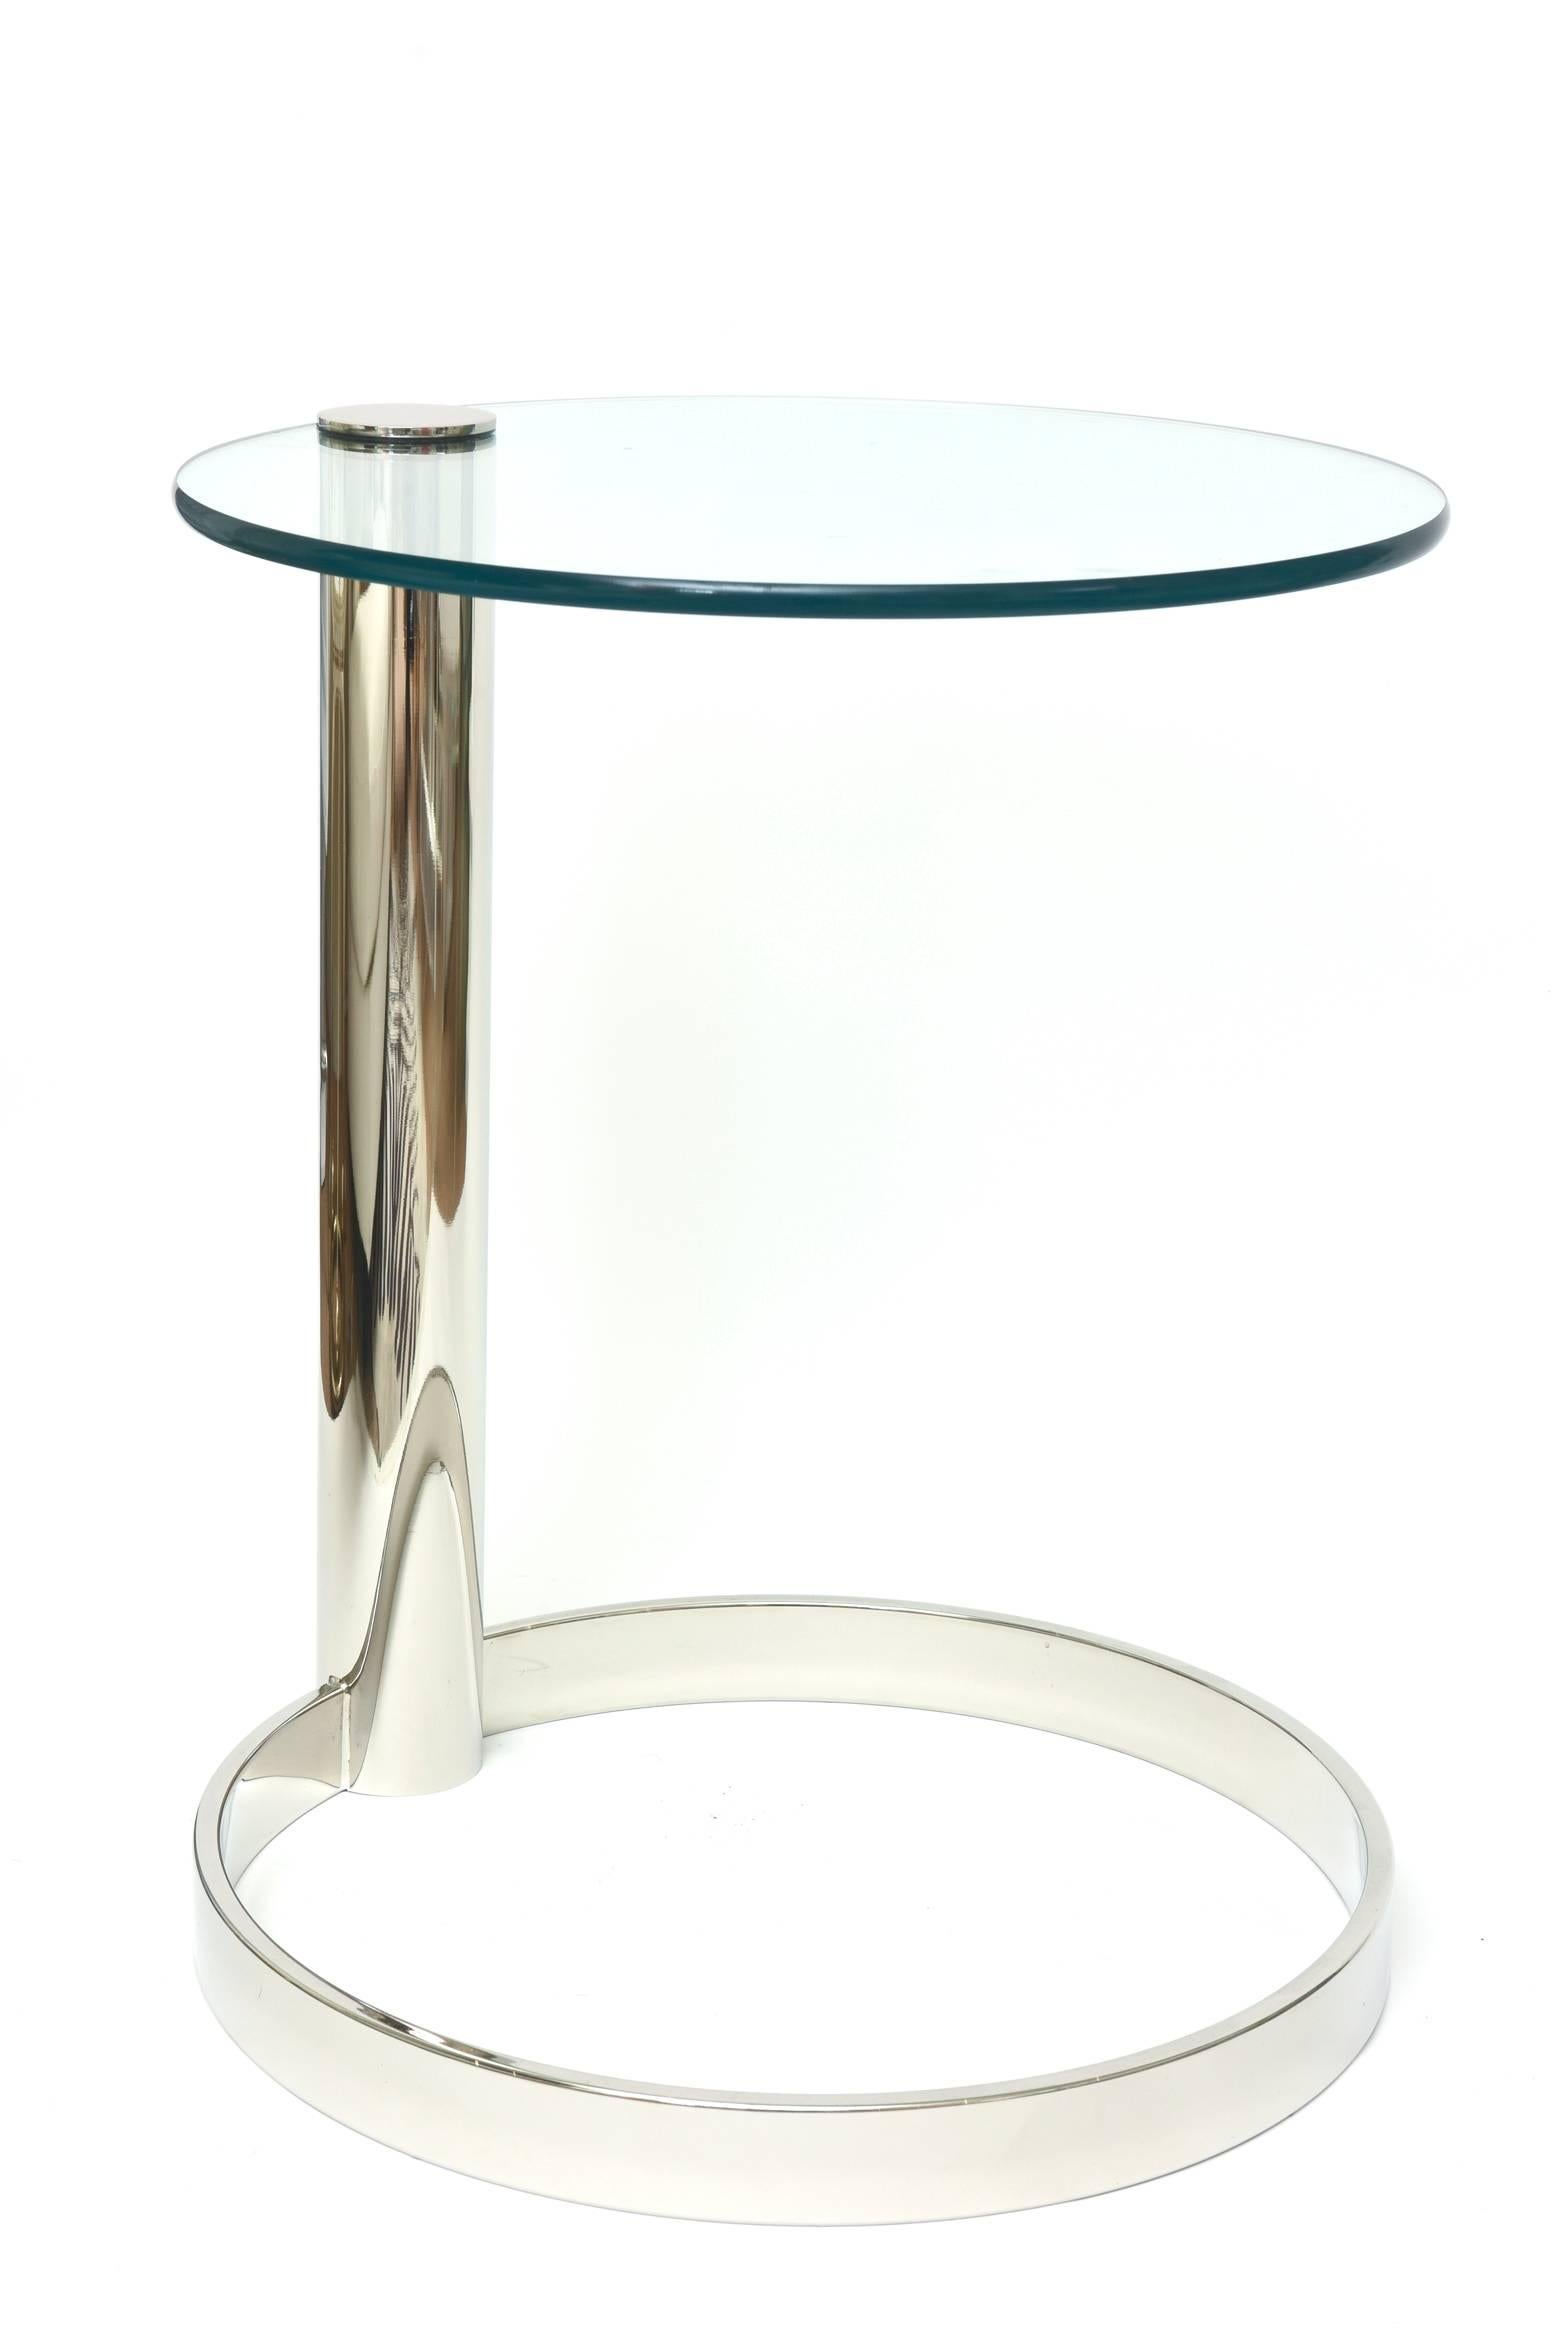 This Classic and modern side table by Leon Rosen for Pace has been beautifully restored with nickel silver over the brass and has a glass top. It is postmodern sculptural. The glass top has a cantilevered swivel top. The nickel silver cap secures